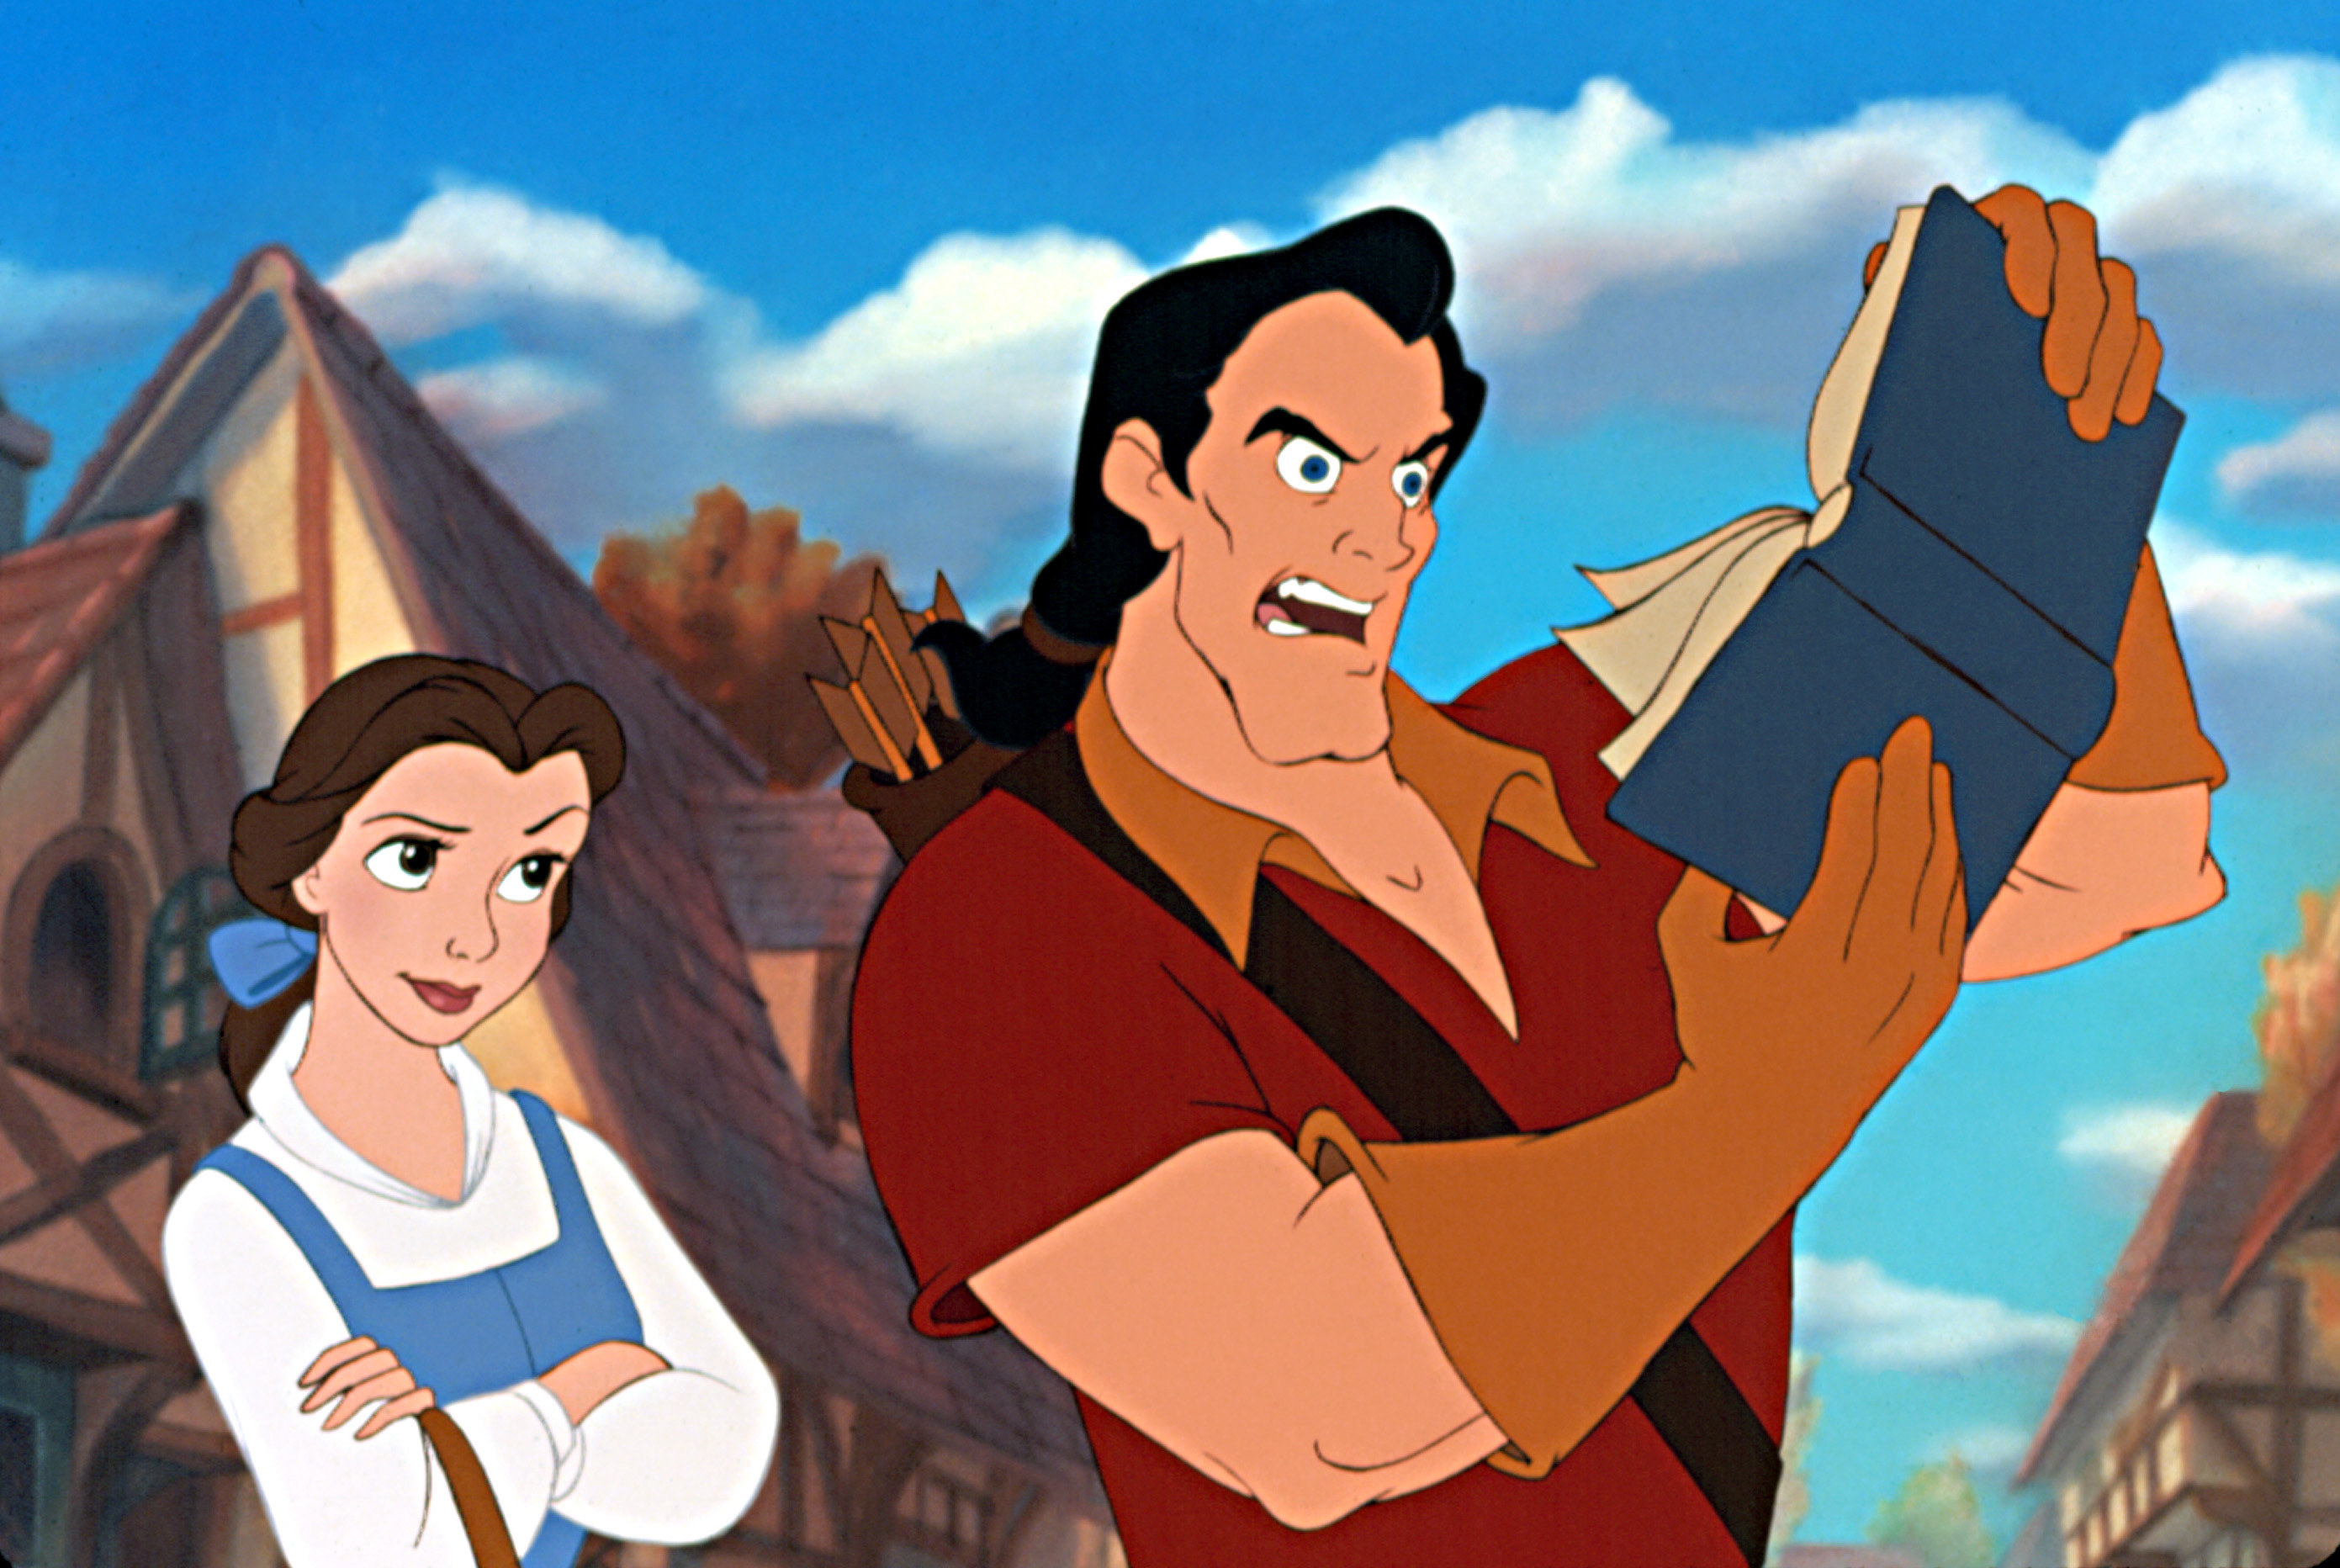 Gaston is puzzled by a book while Belle looks on